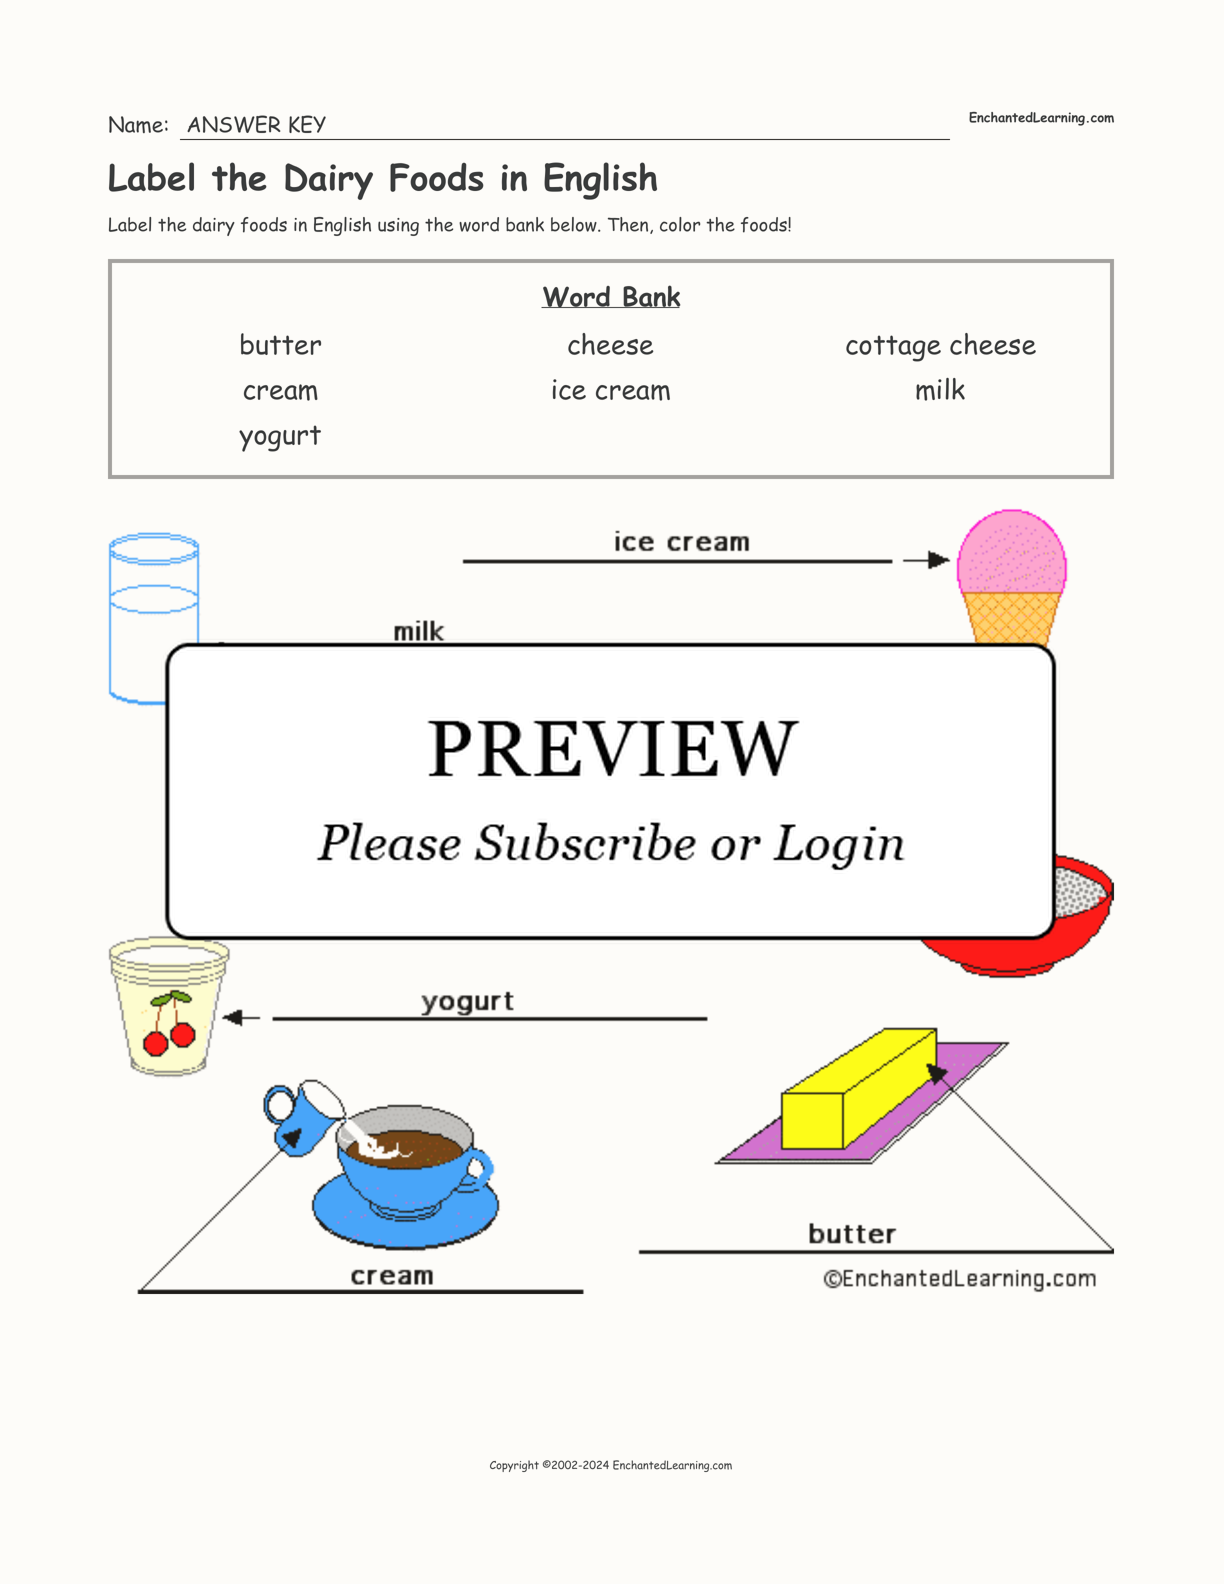 Label the Dairy Foods in English interactive worksheet page 2